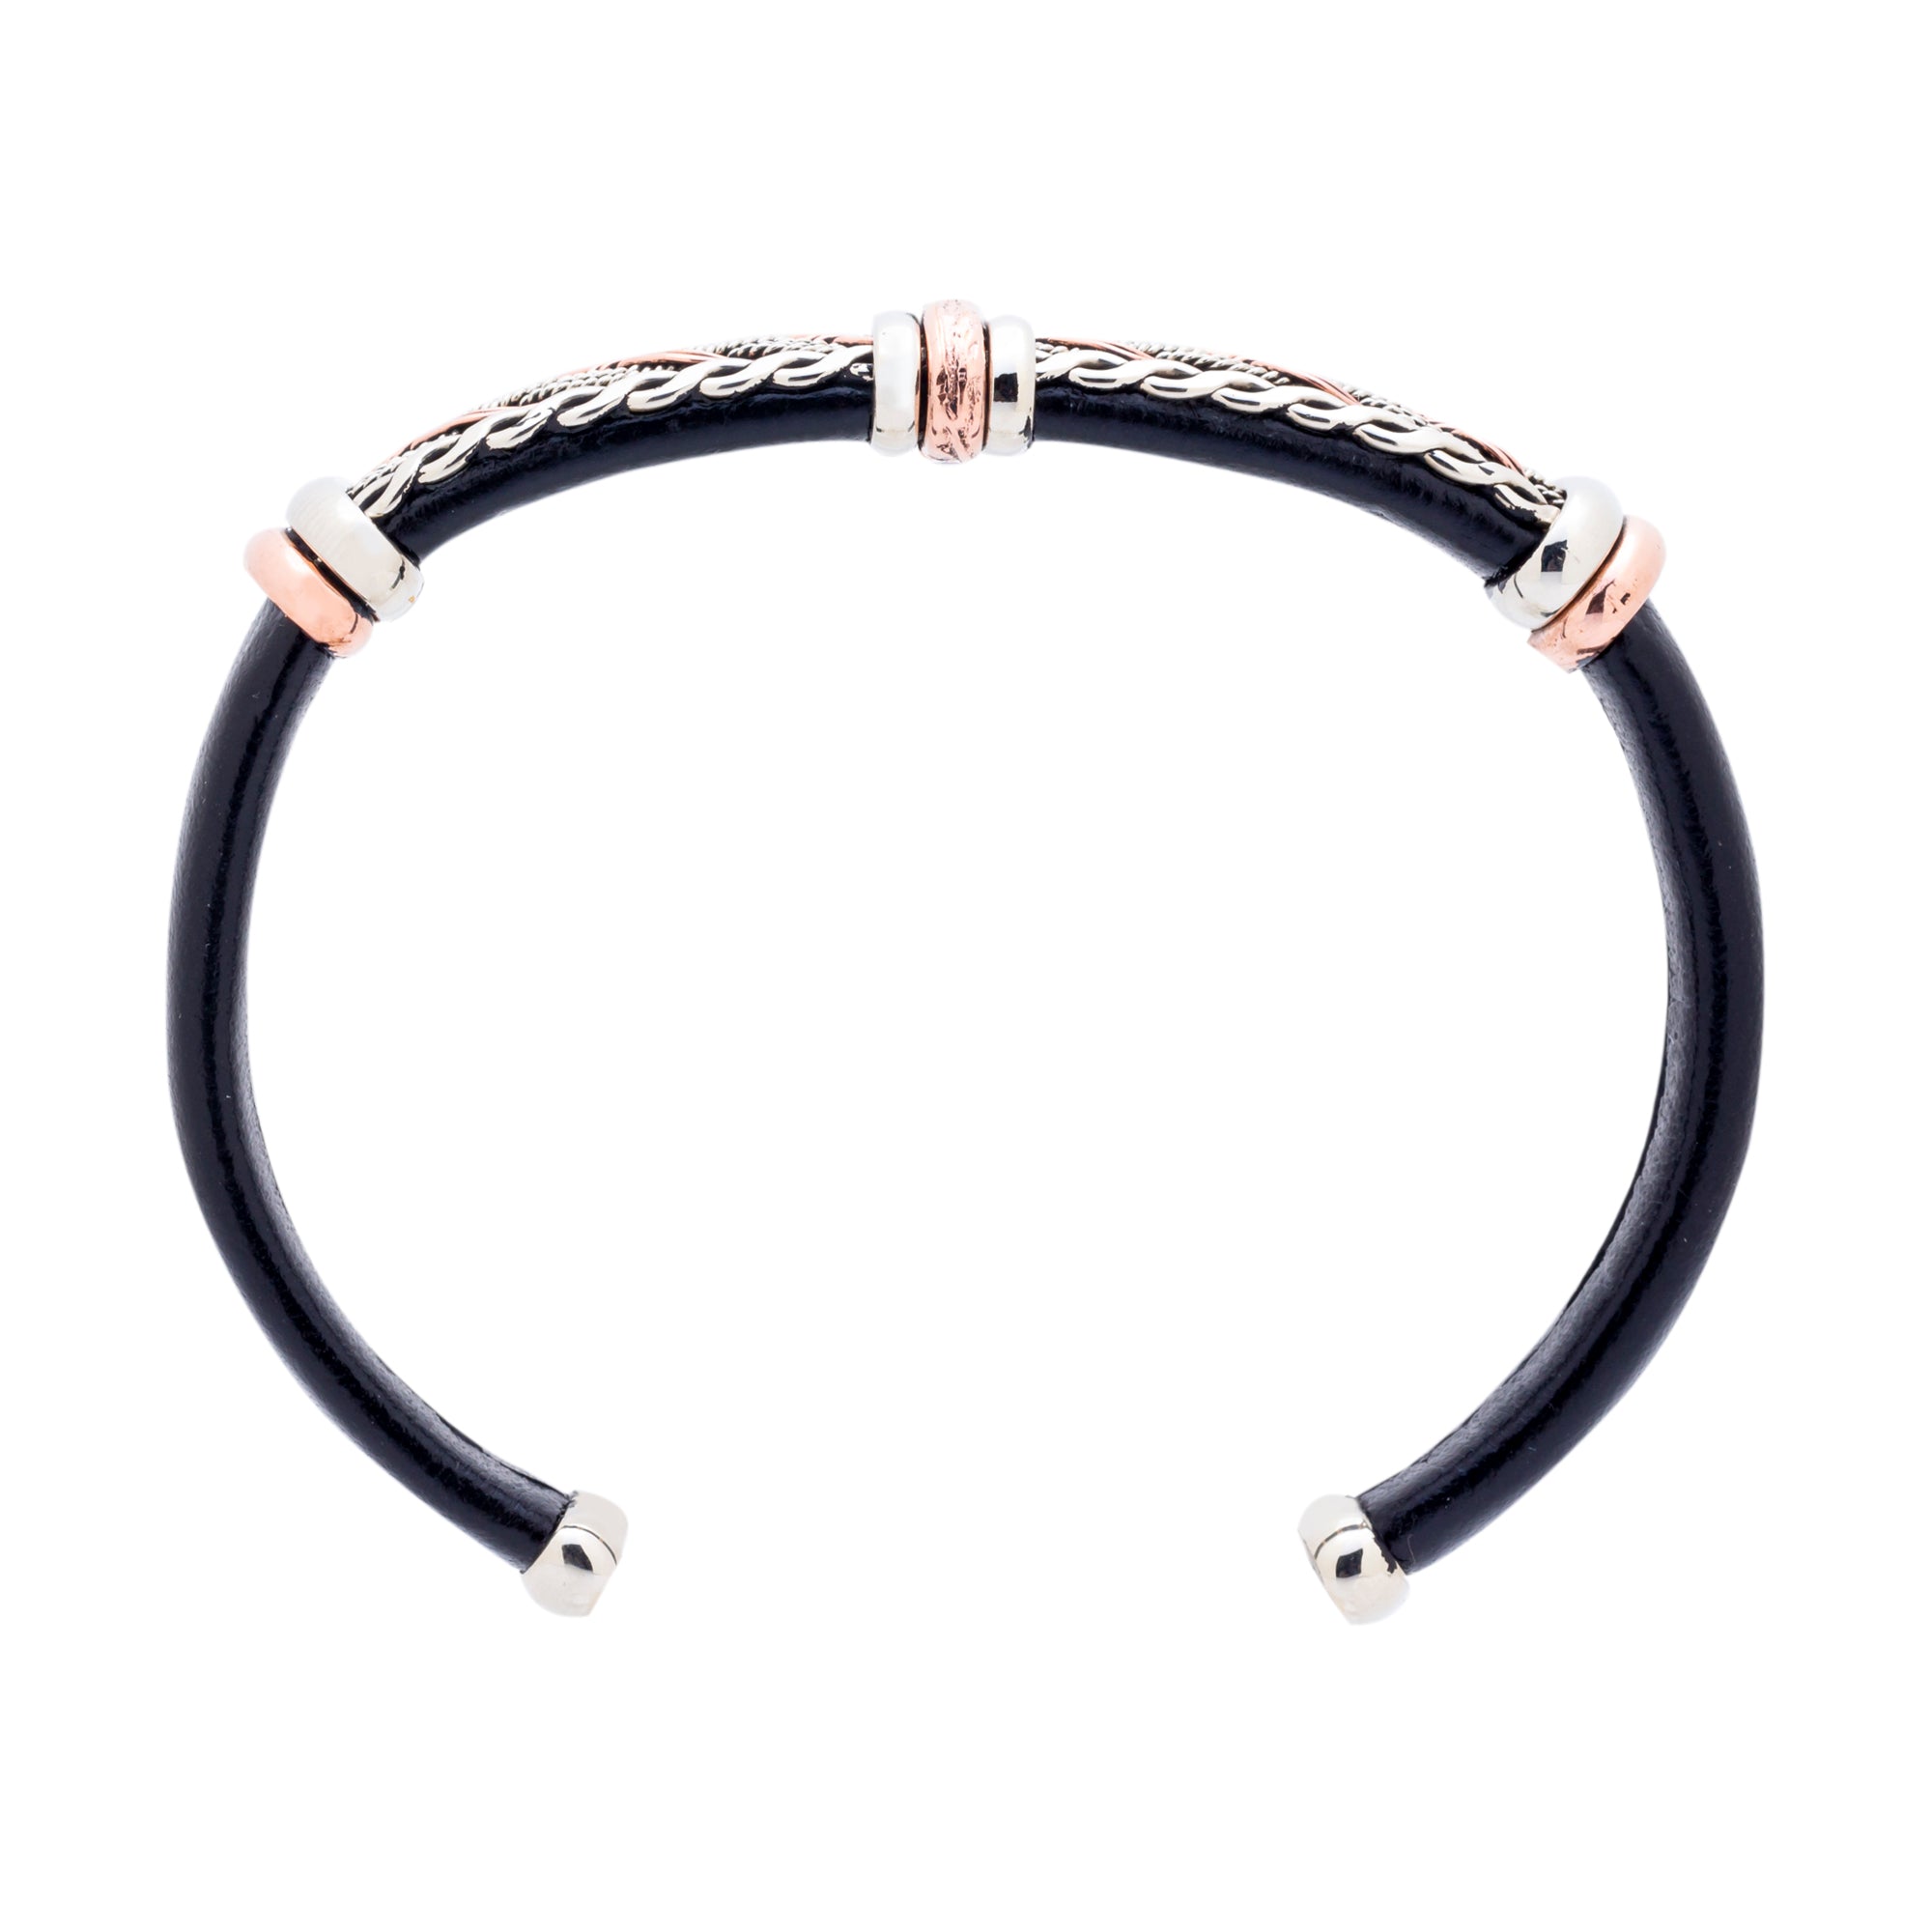 Leather Bracelet BR.ULB.0108 - Handcrafted by HPSilver, LLC.